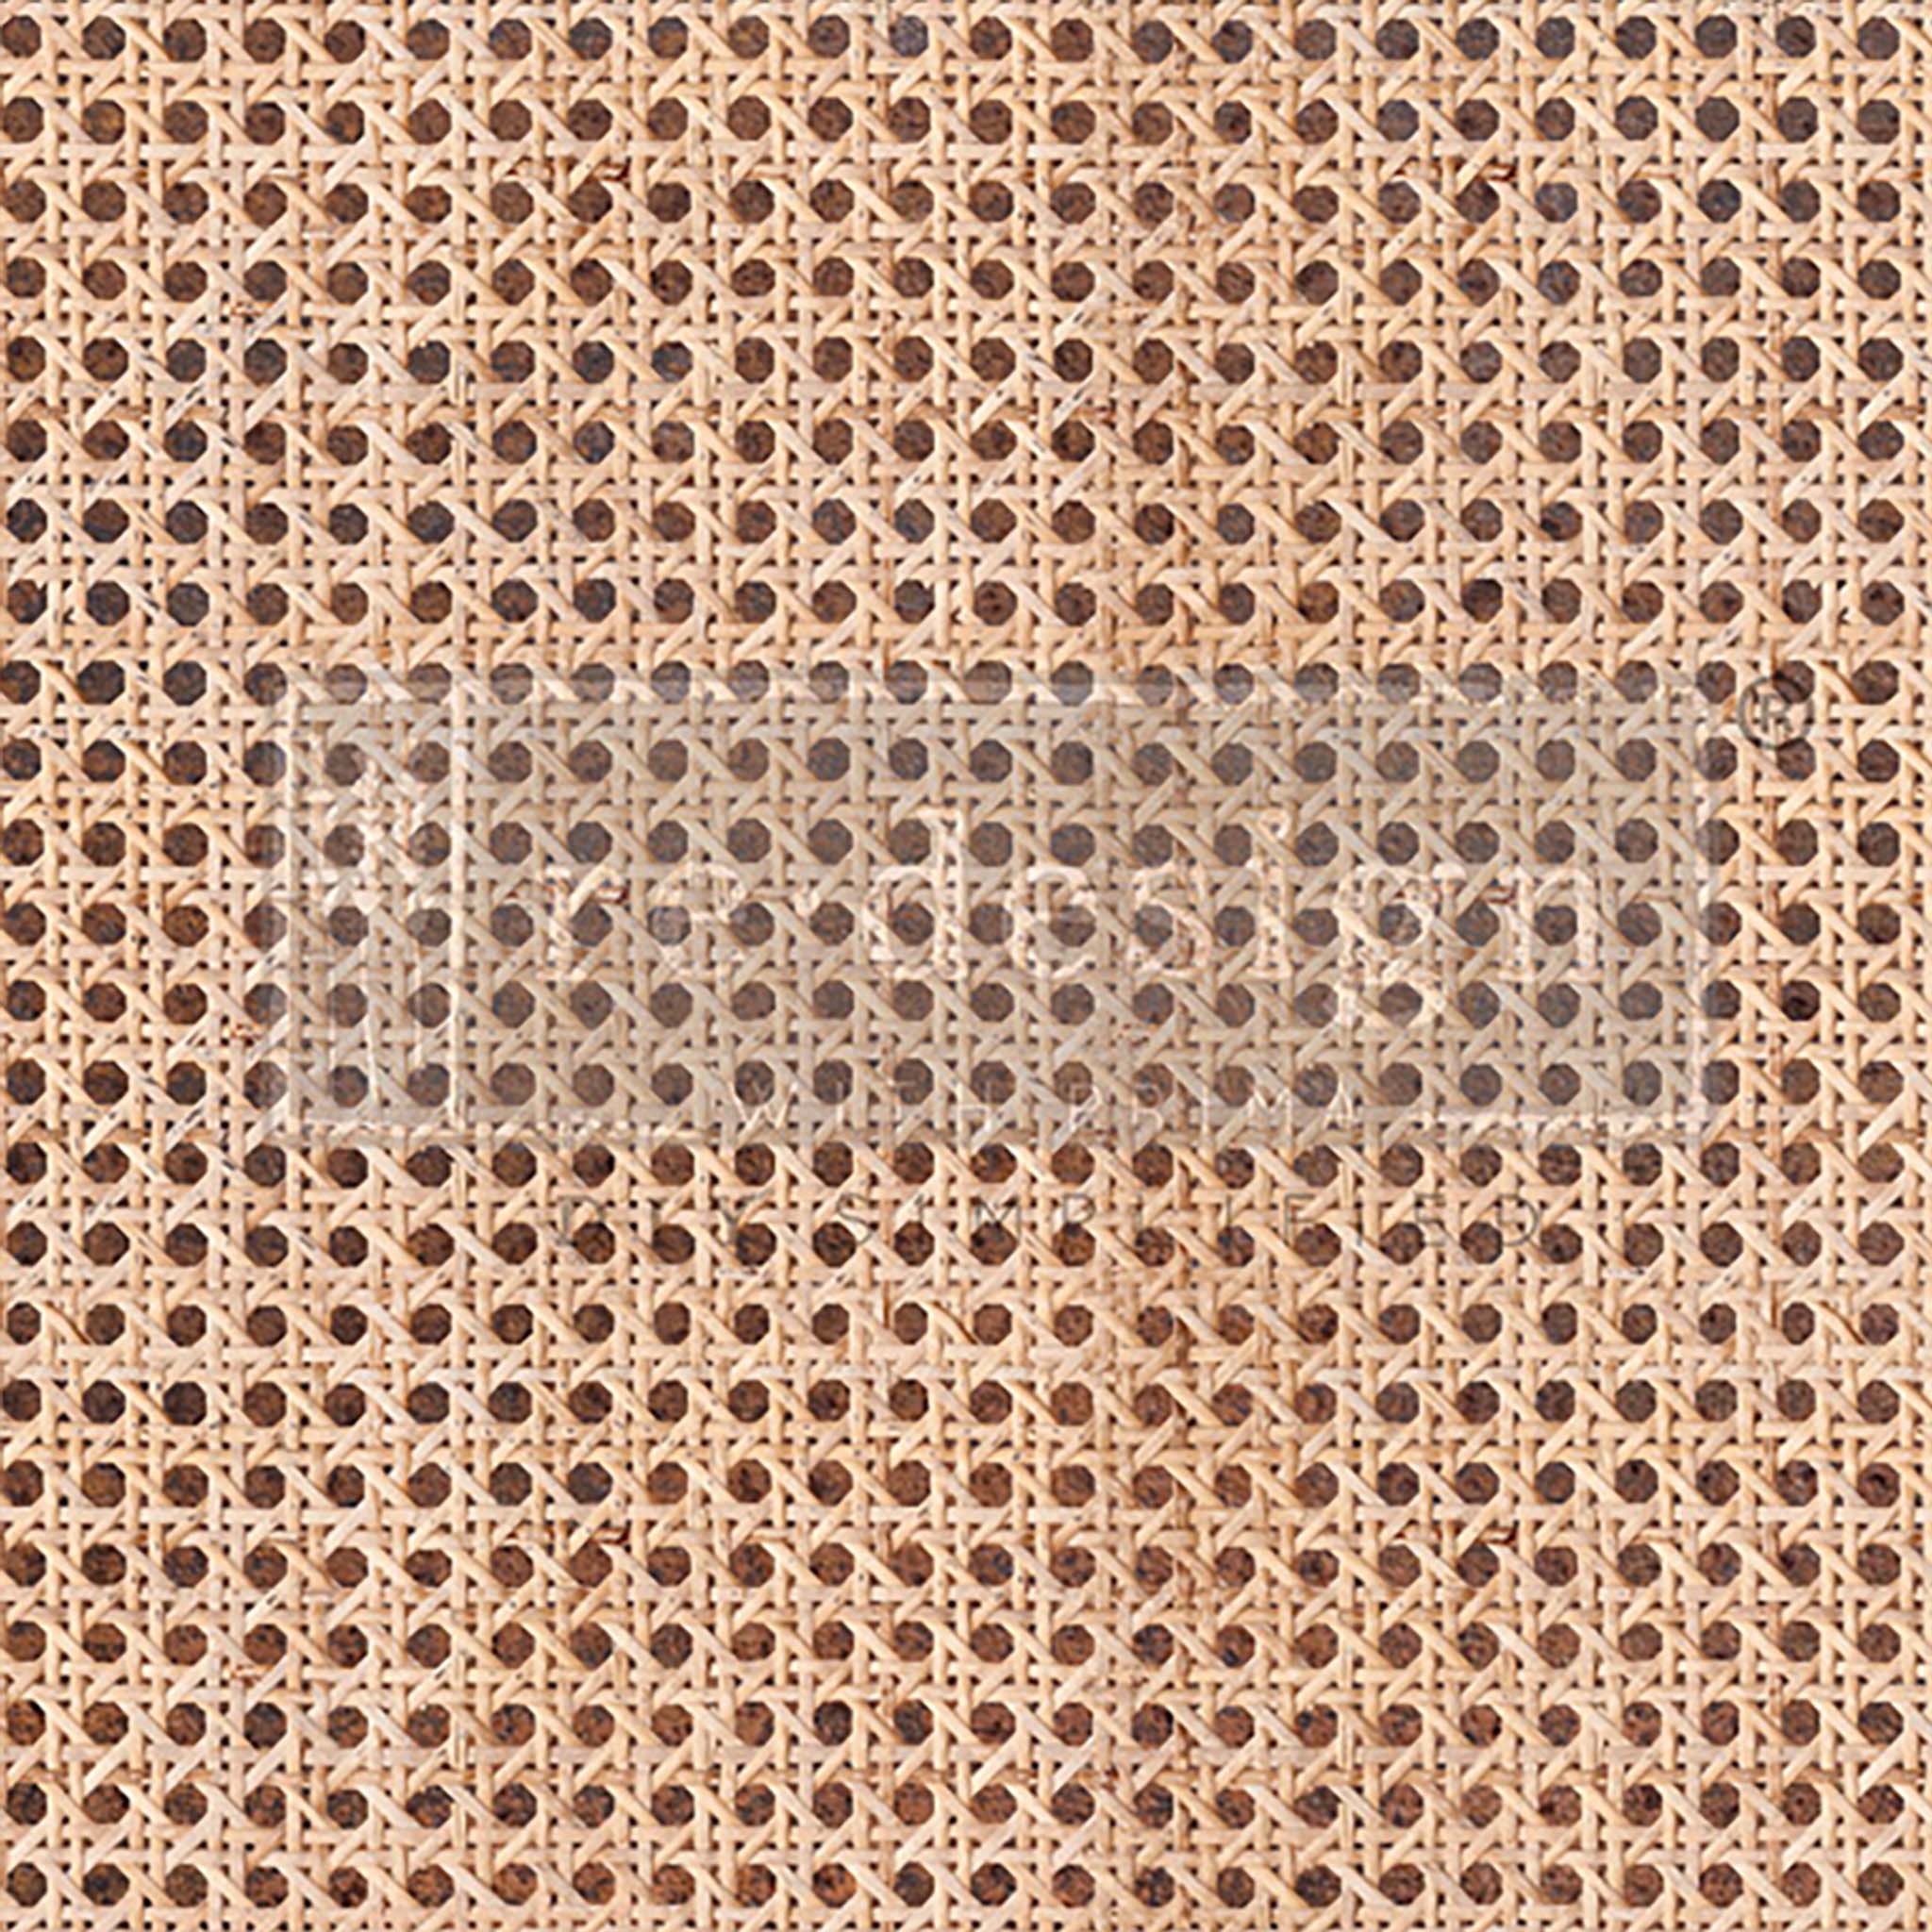 Close-up of a tissue paper design that features cane rattan.